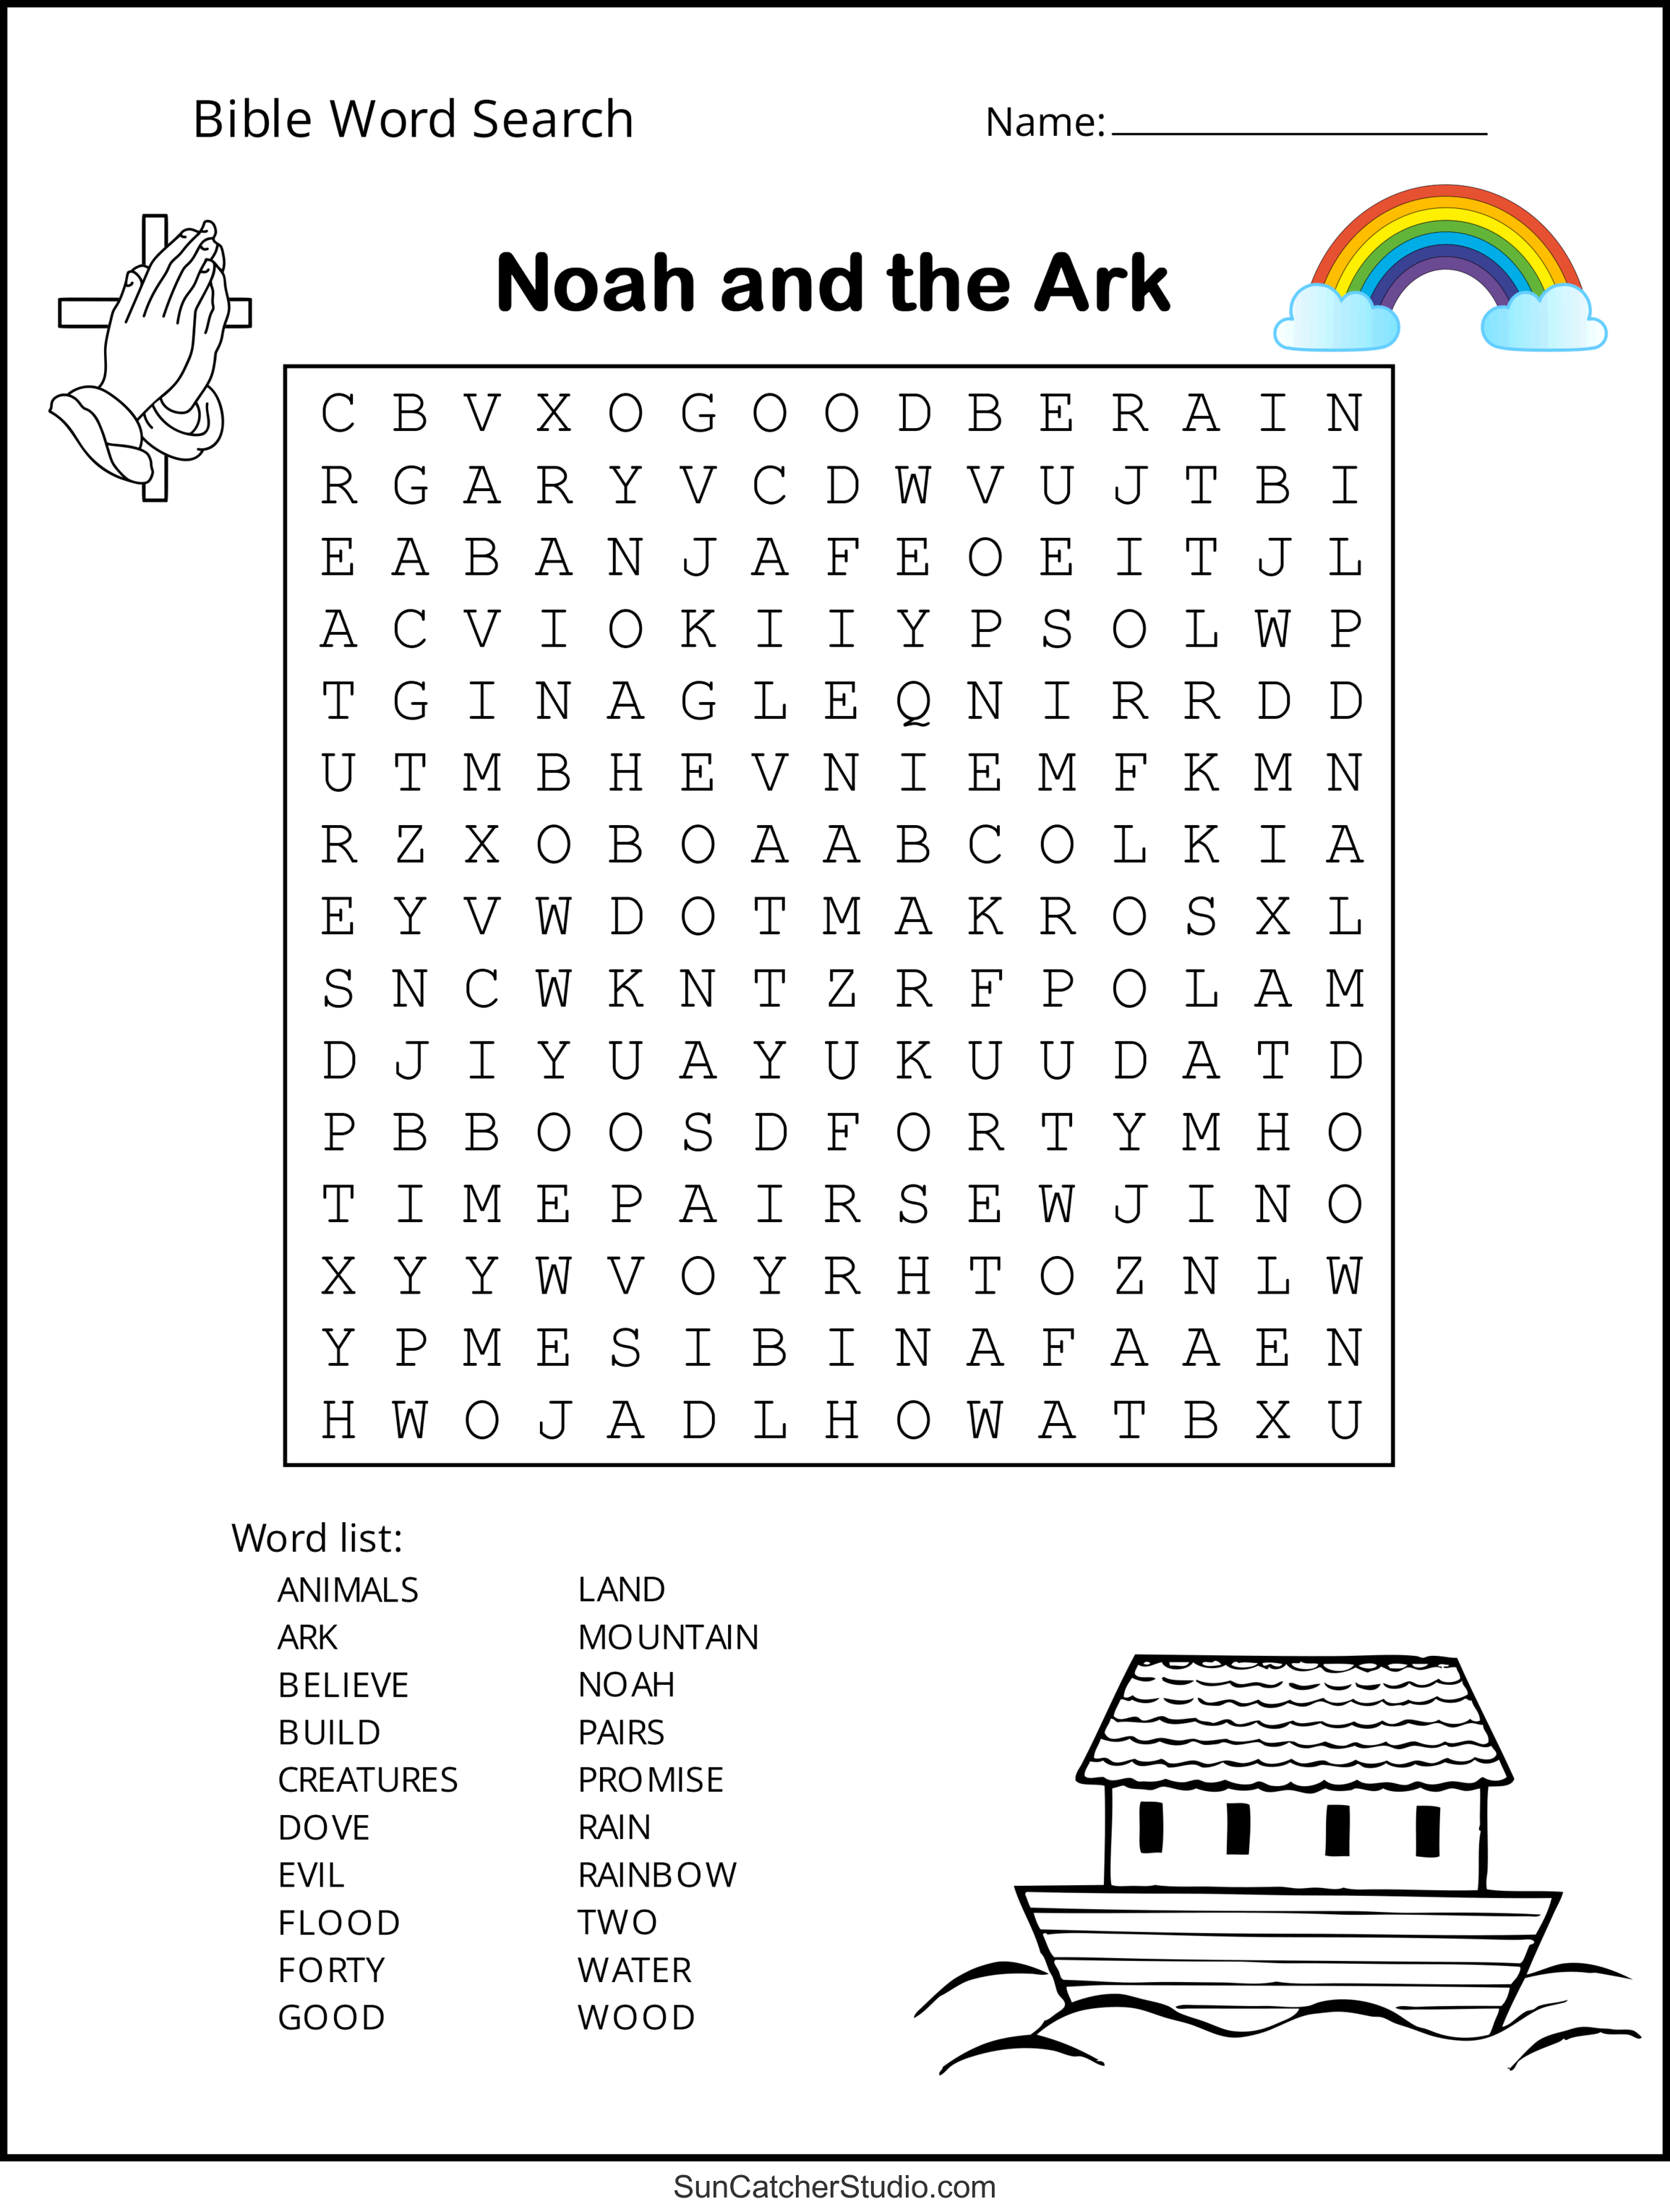 bible-word-search-puzzles-free-printable-christian-games-diy